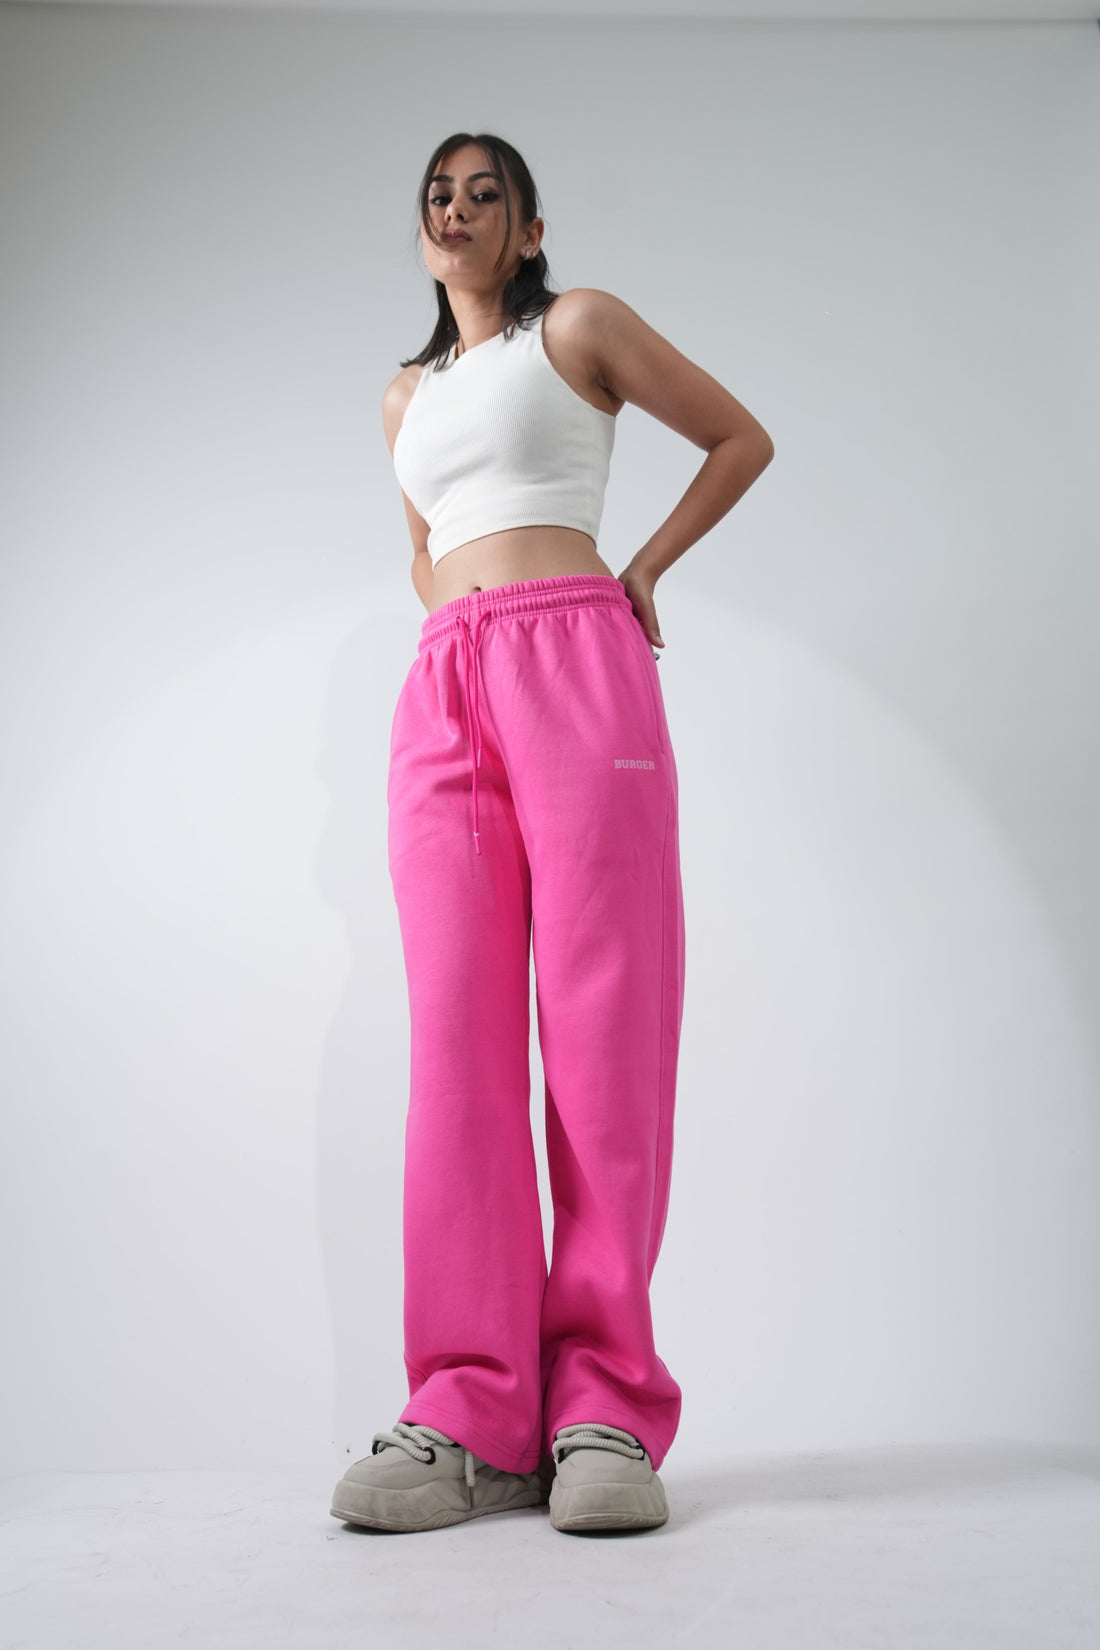 Fat Pants (Hot Pink) For Men and Women